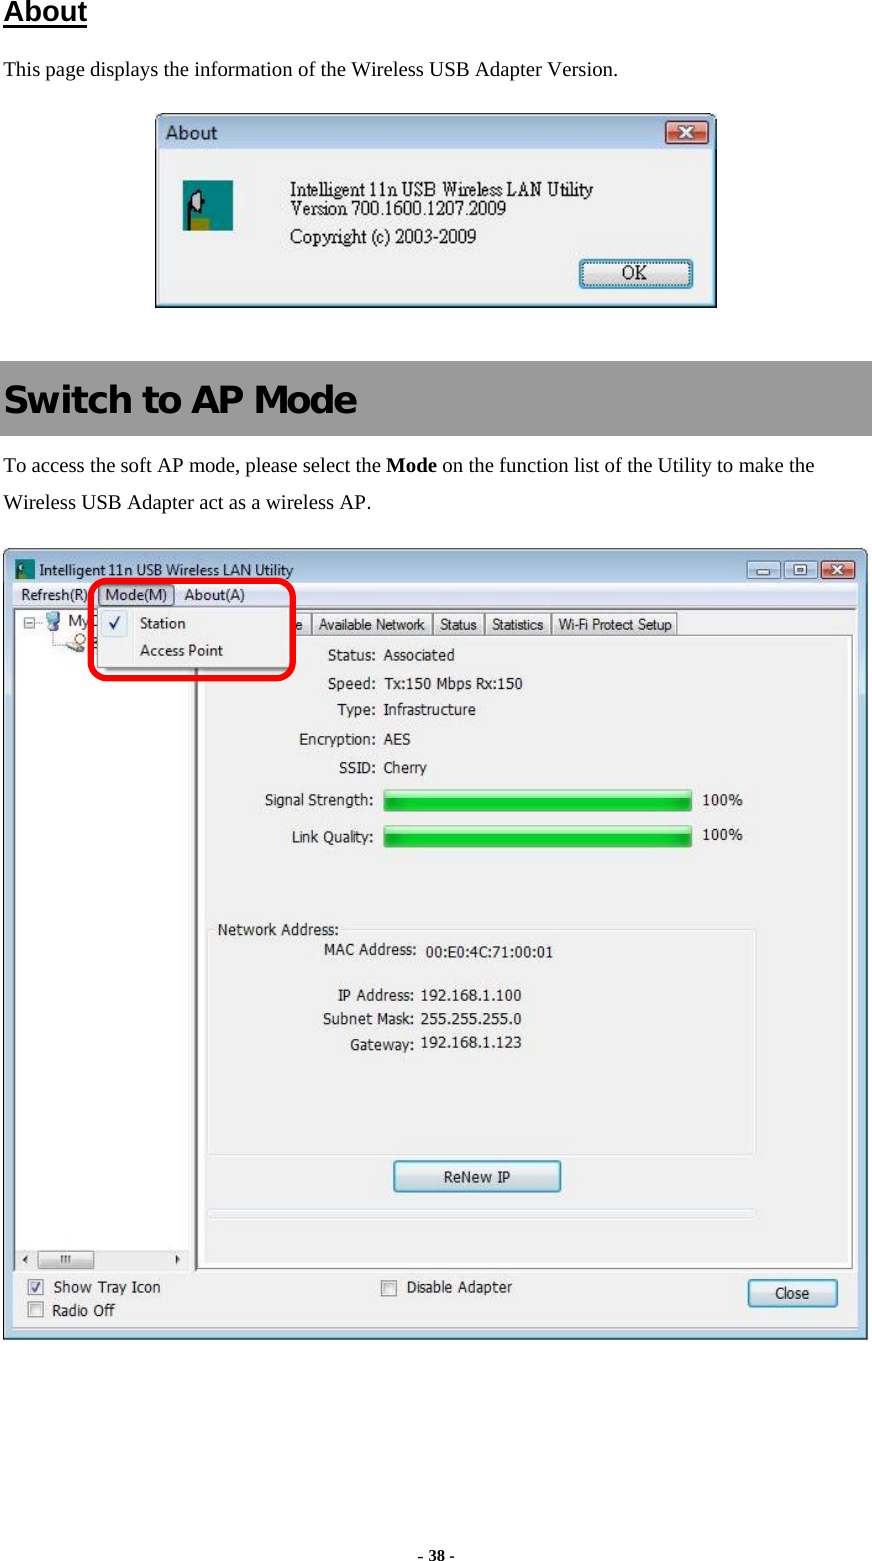  - 38 - About This page displays the information of the Wireless USB Adapter Version.   Switch to AP Mode To access the soft AP mode, please select the Mode on the function list of the Utility to make the Wireless USB Adapter act as a wireless AP.   